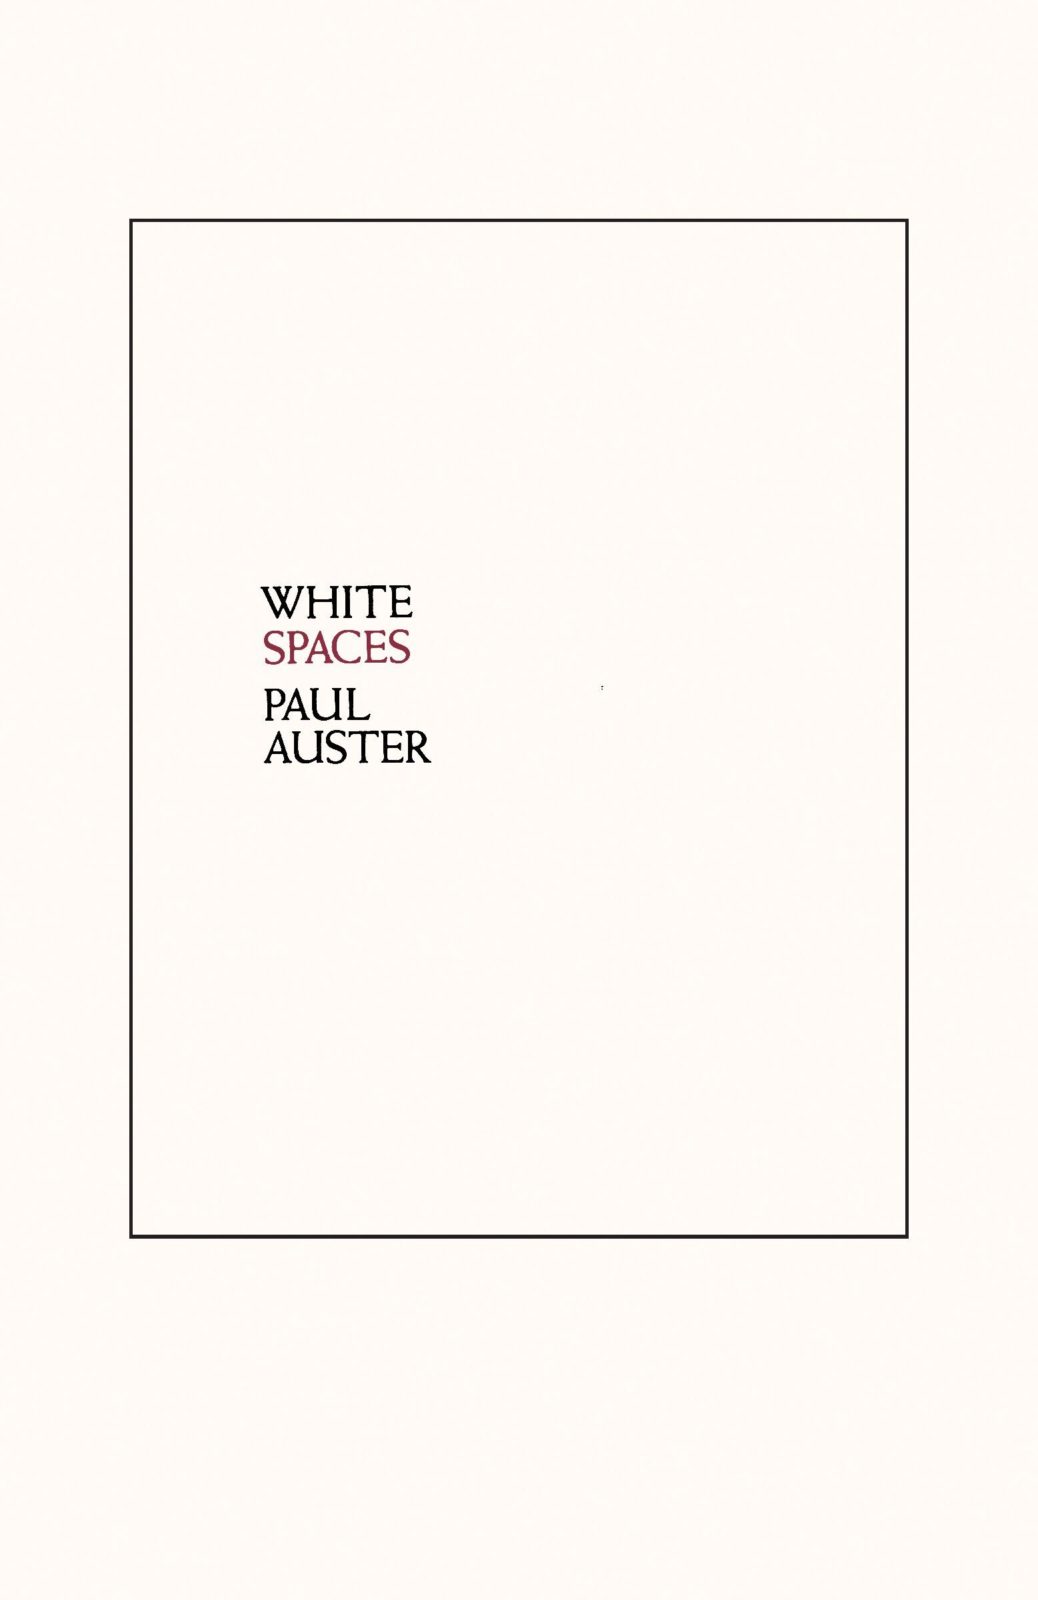 White Spaces by Paul Auster - Carla Cain-Walther